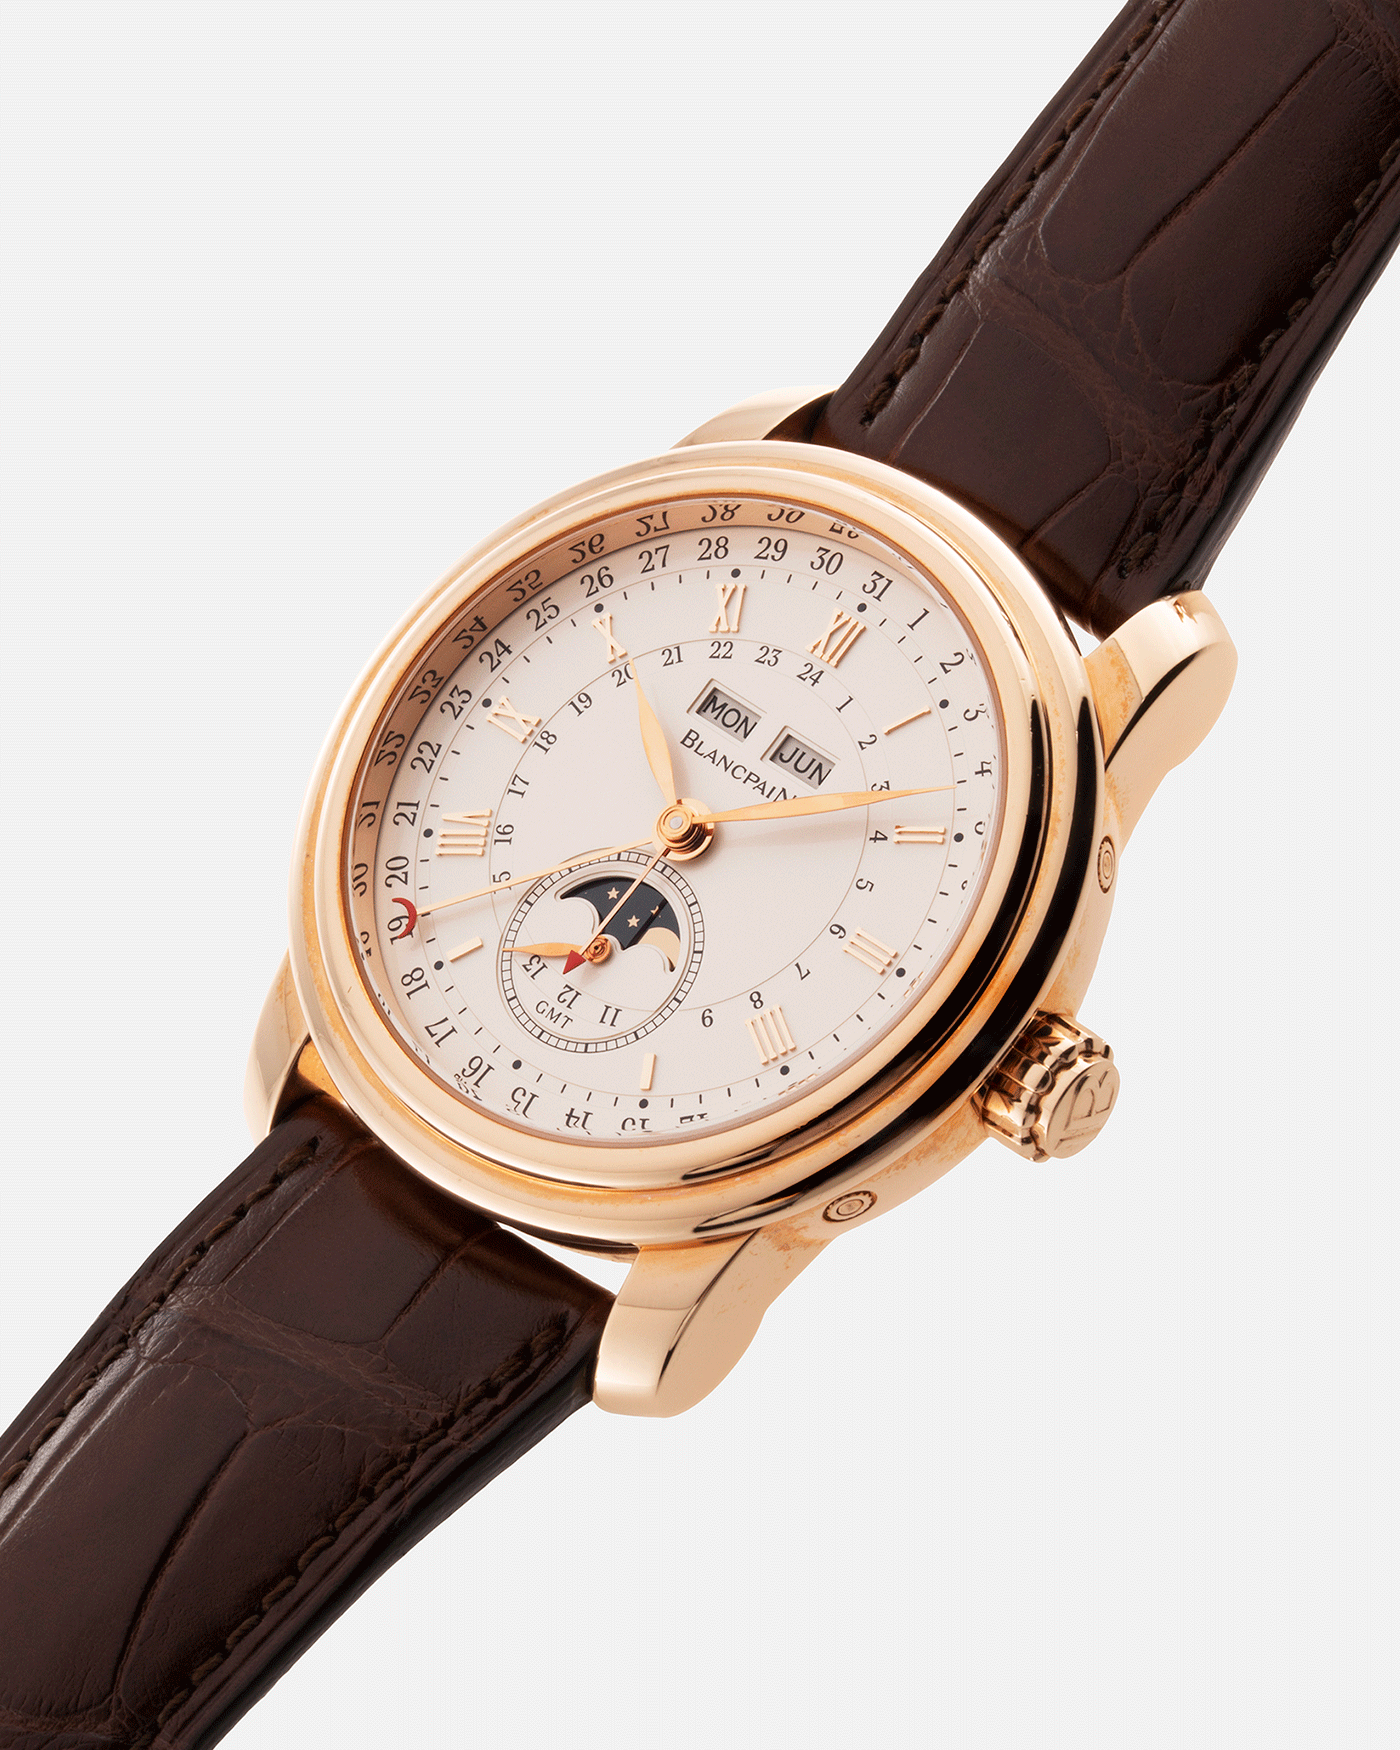 Brand: Blancpain Year: 2009 Model: Le Brassus Reference Number: 4276-3642-55B Material: Rose Gold Movement: Cal. 67A6 Case Diameter: 42mm Bracelet/Strap: Blancpain Brown Alligator Strap with 18k Rose Gold Deployant Clasp